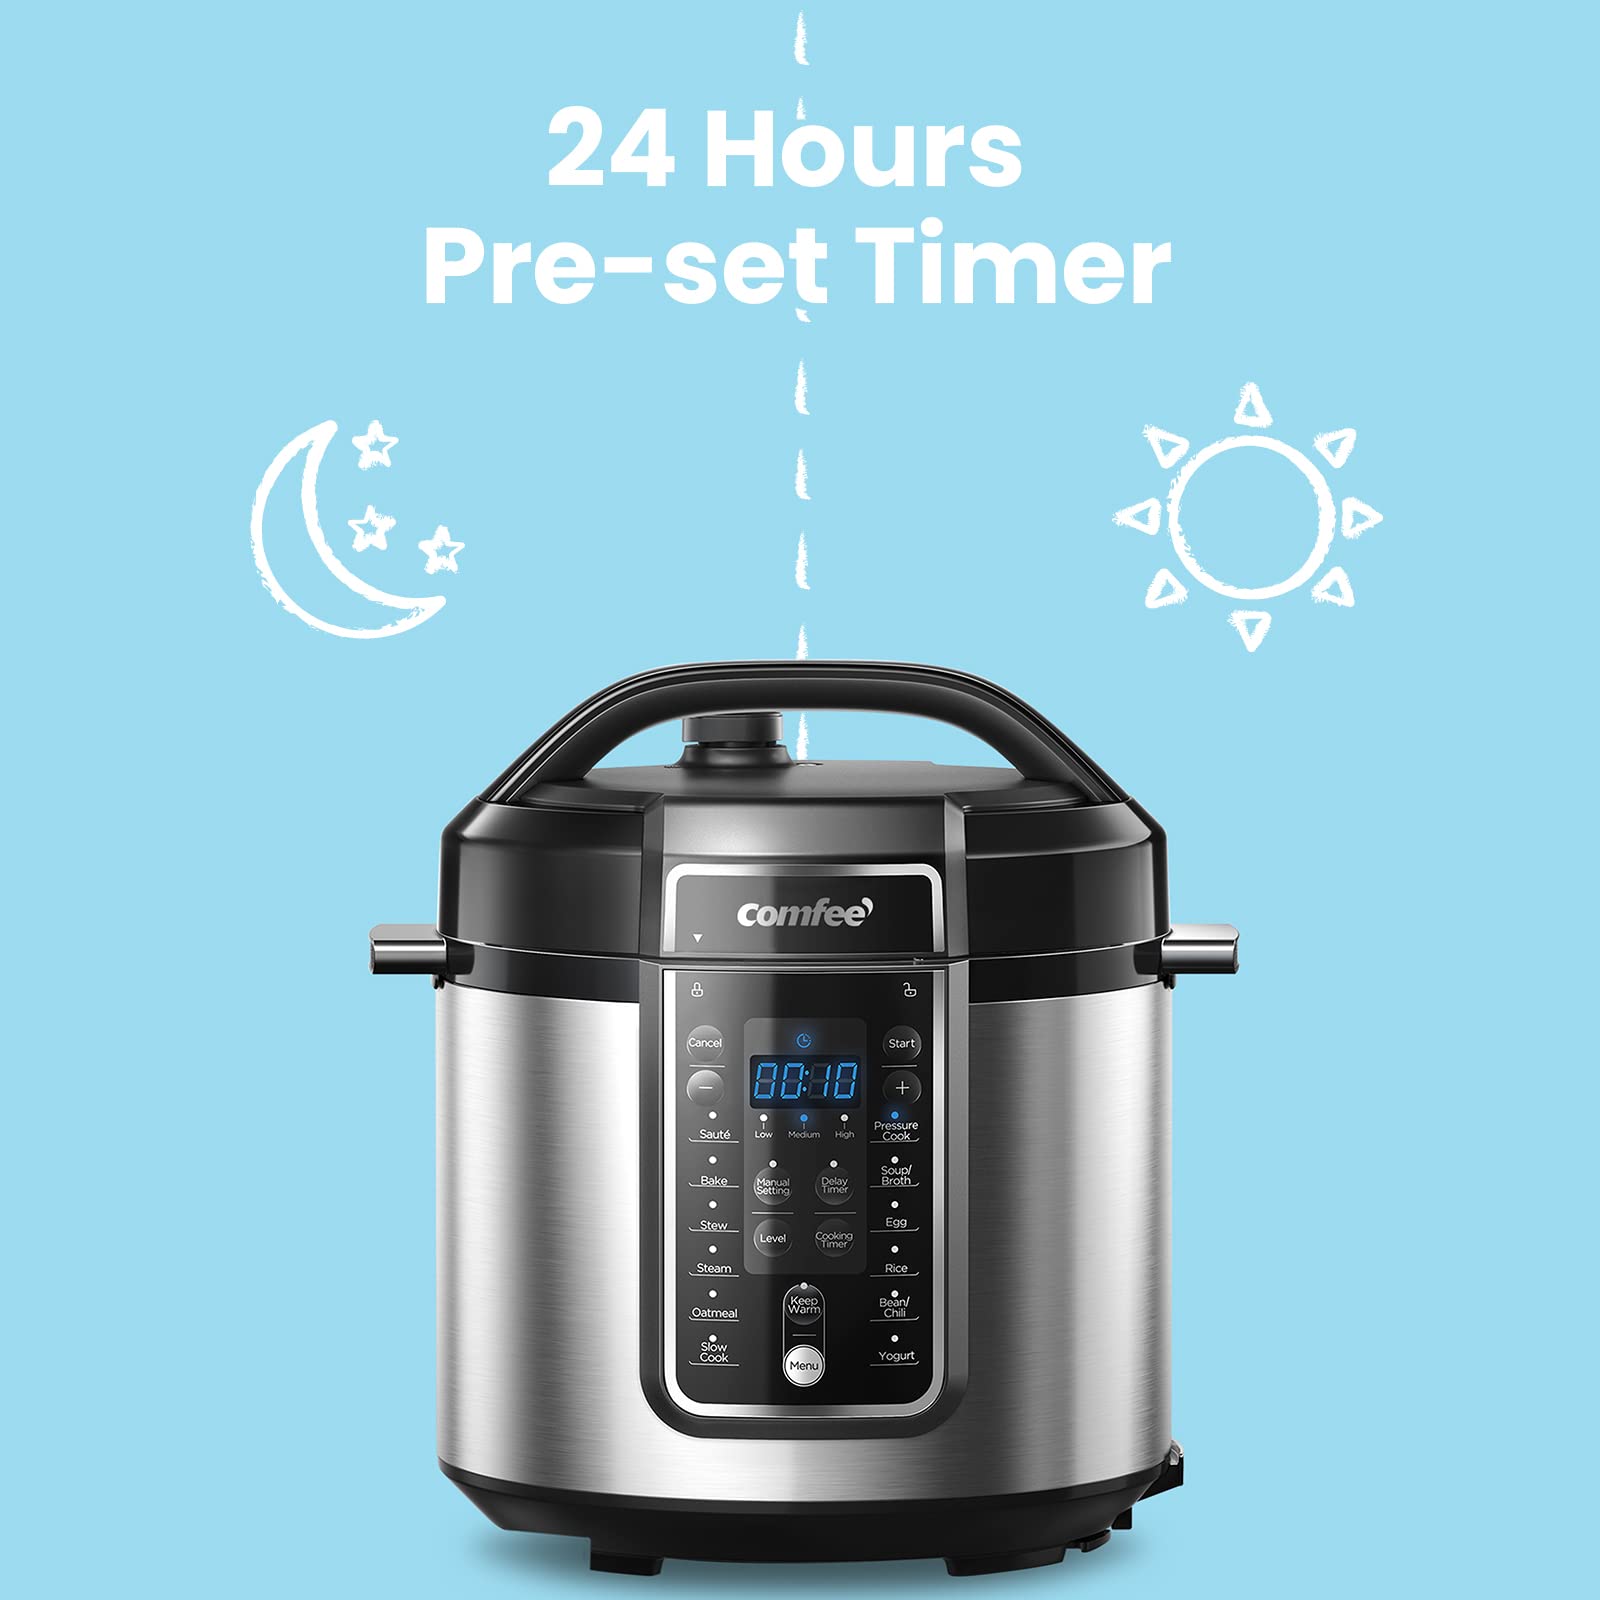 COMFEE’ Pressure Cooker 6 Quart with 12 Presets, Multi-Functional Programmable Slow Cooker, Rice Cooker, Steamer, Sauté pan, Egg Cooker, Warmer and More